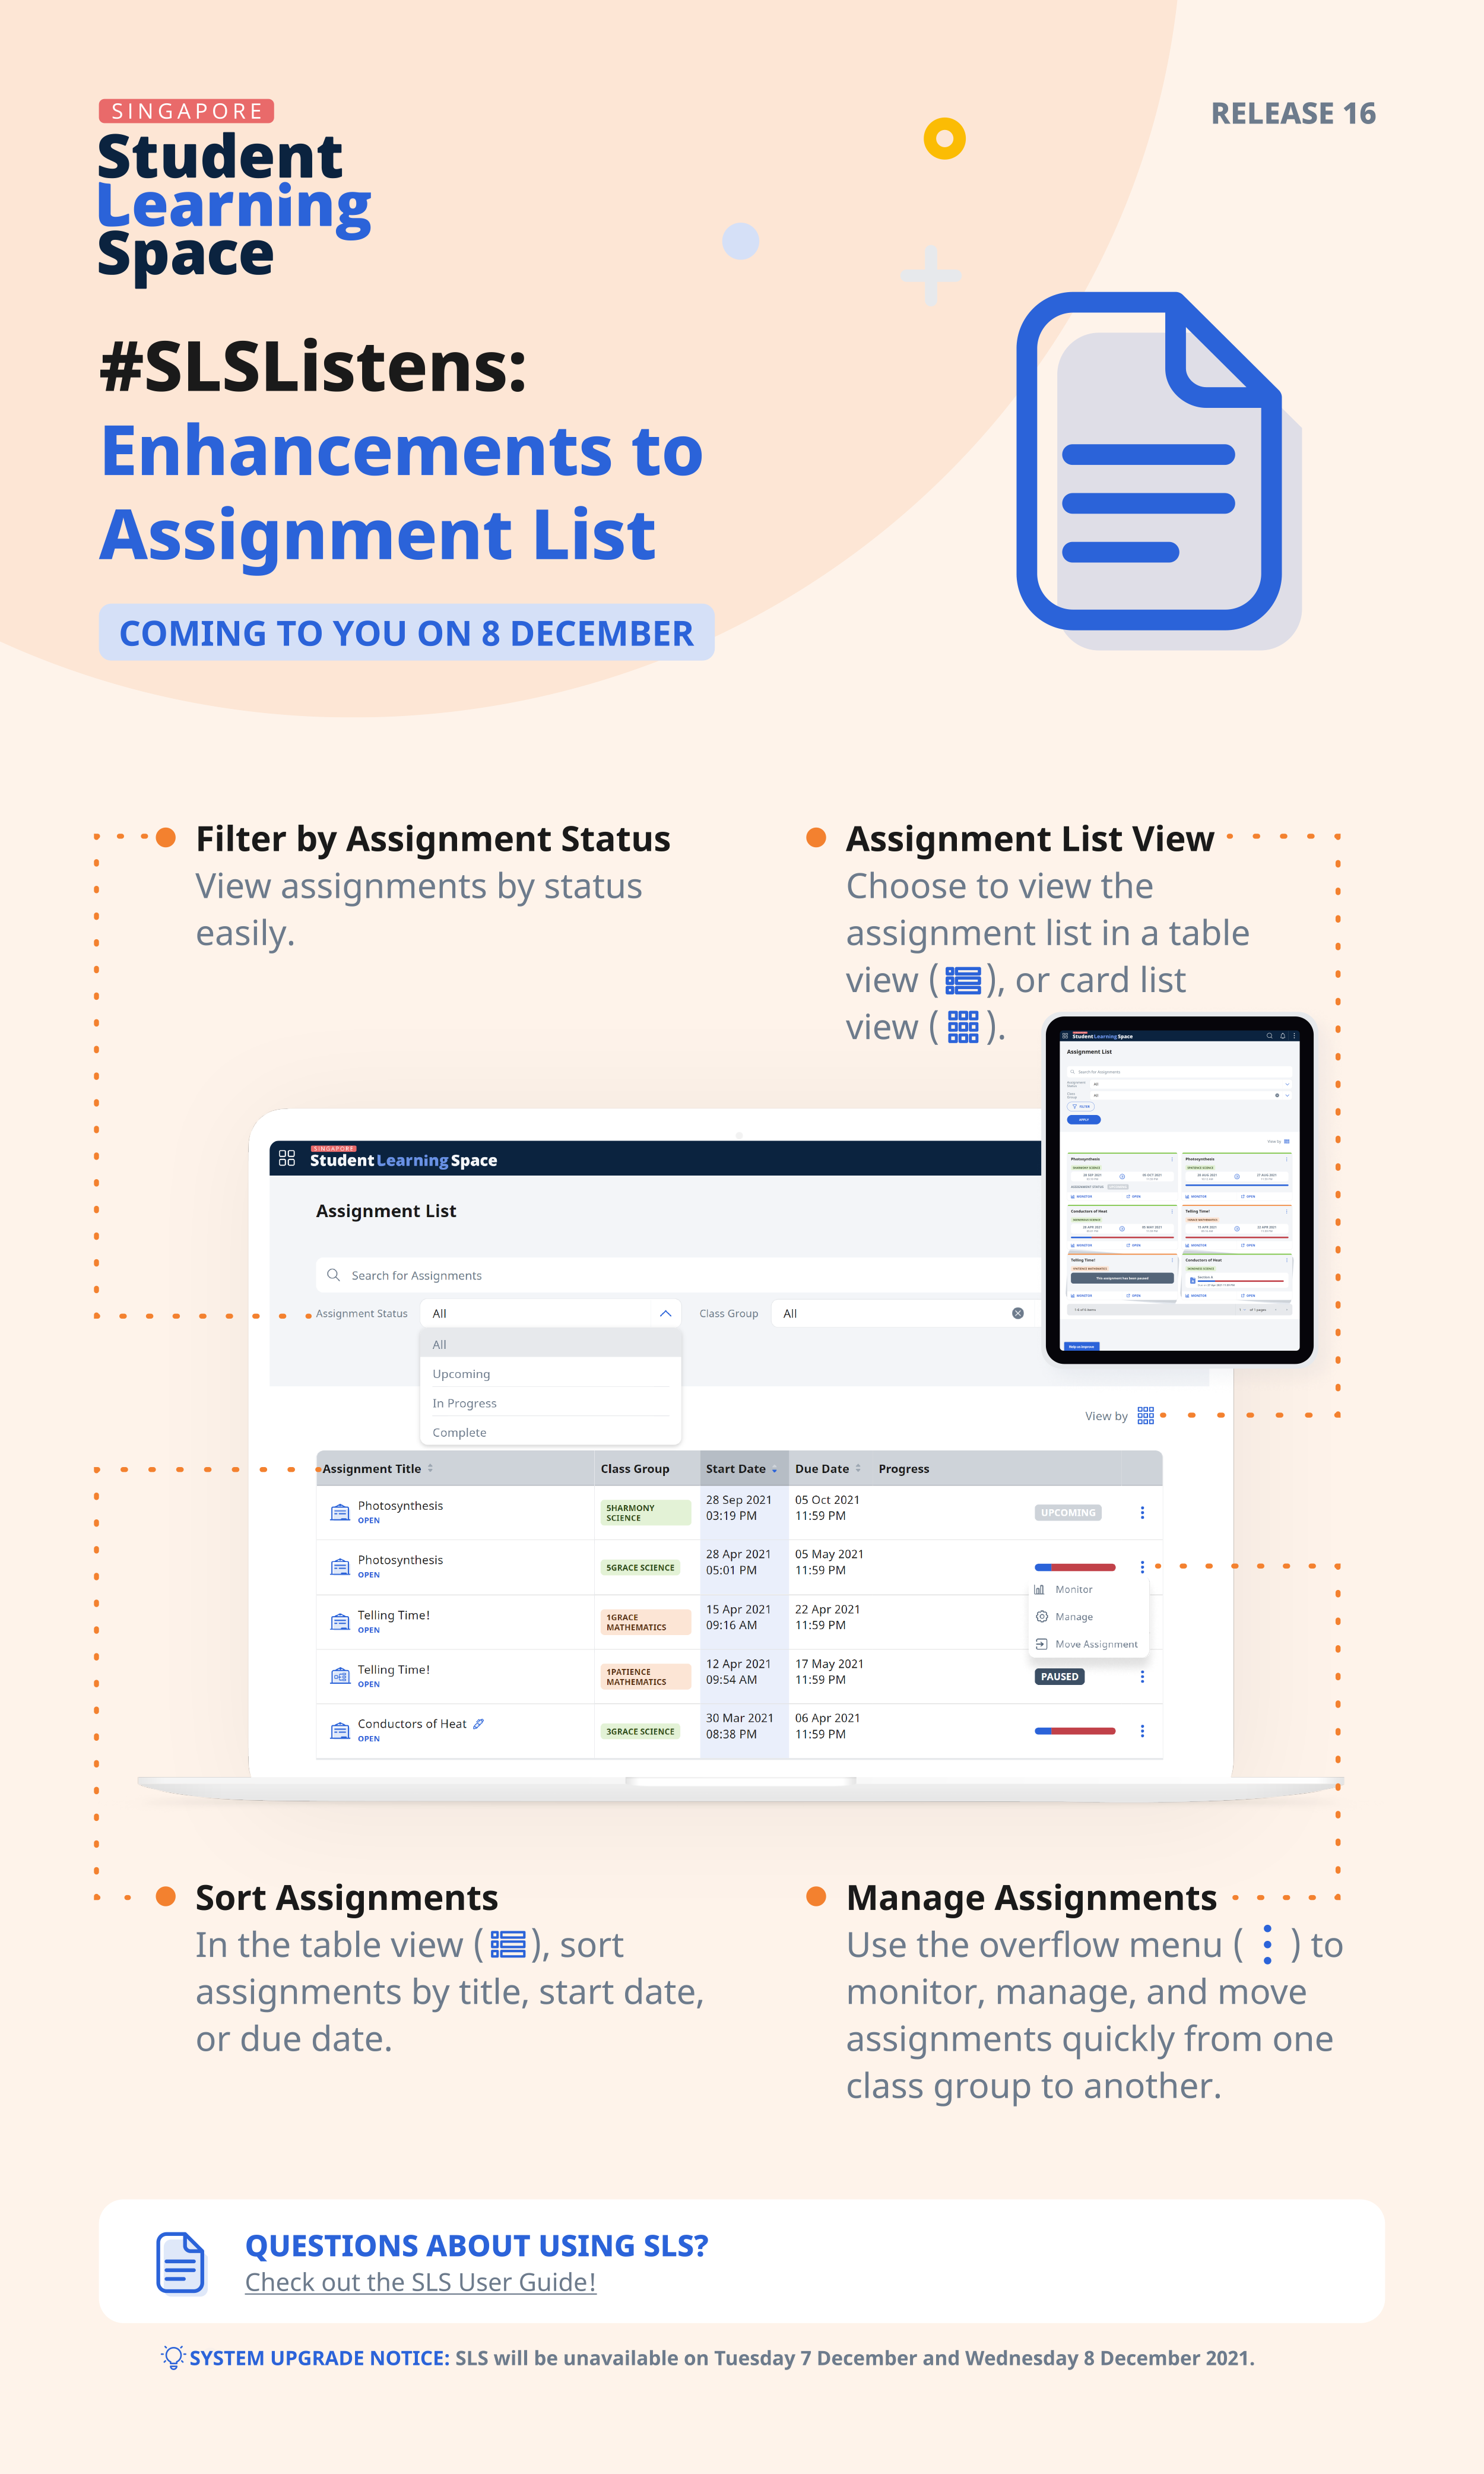 Enhancements to Assignment List